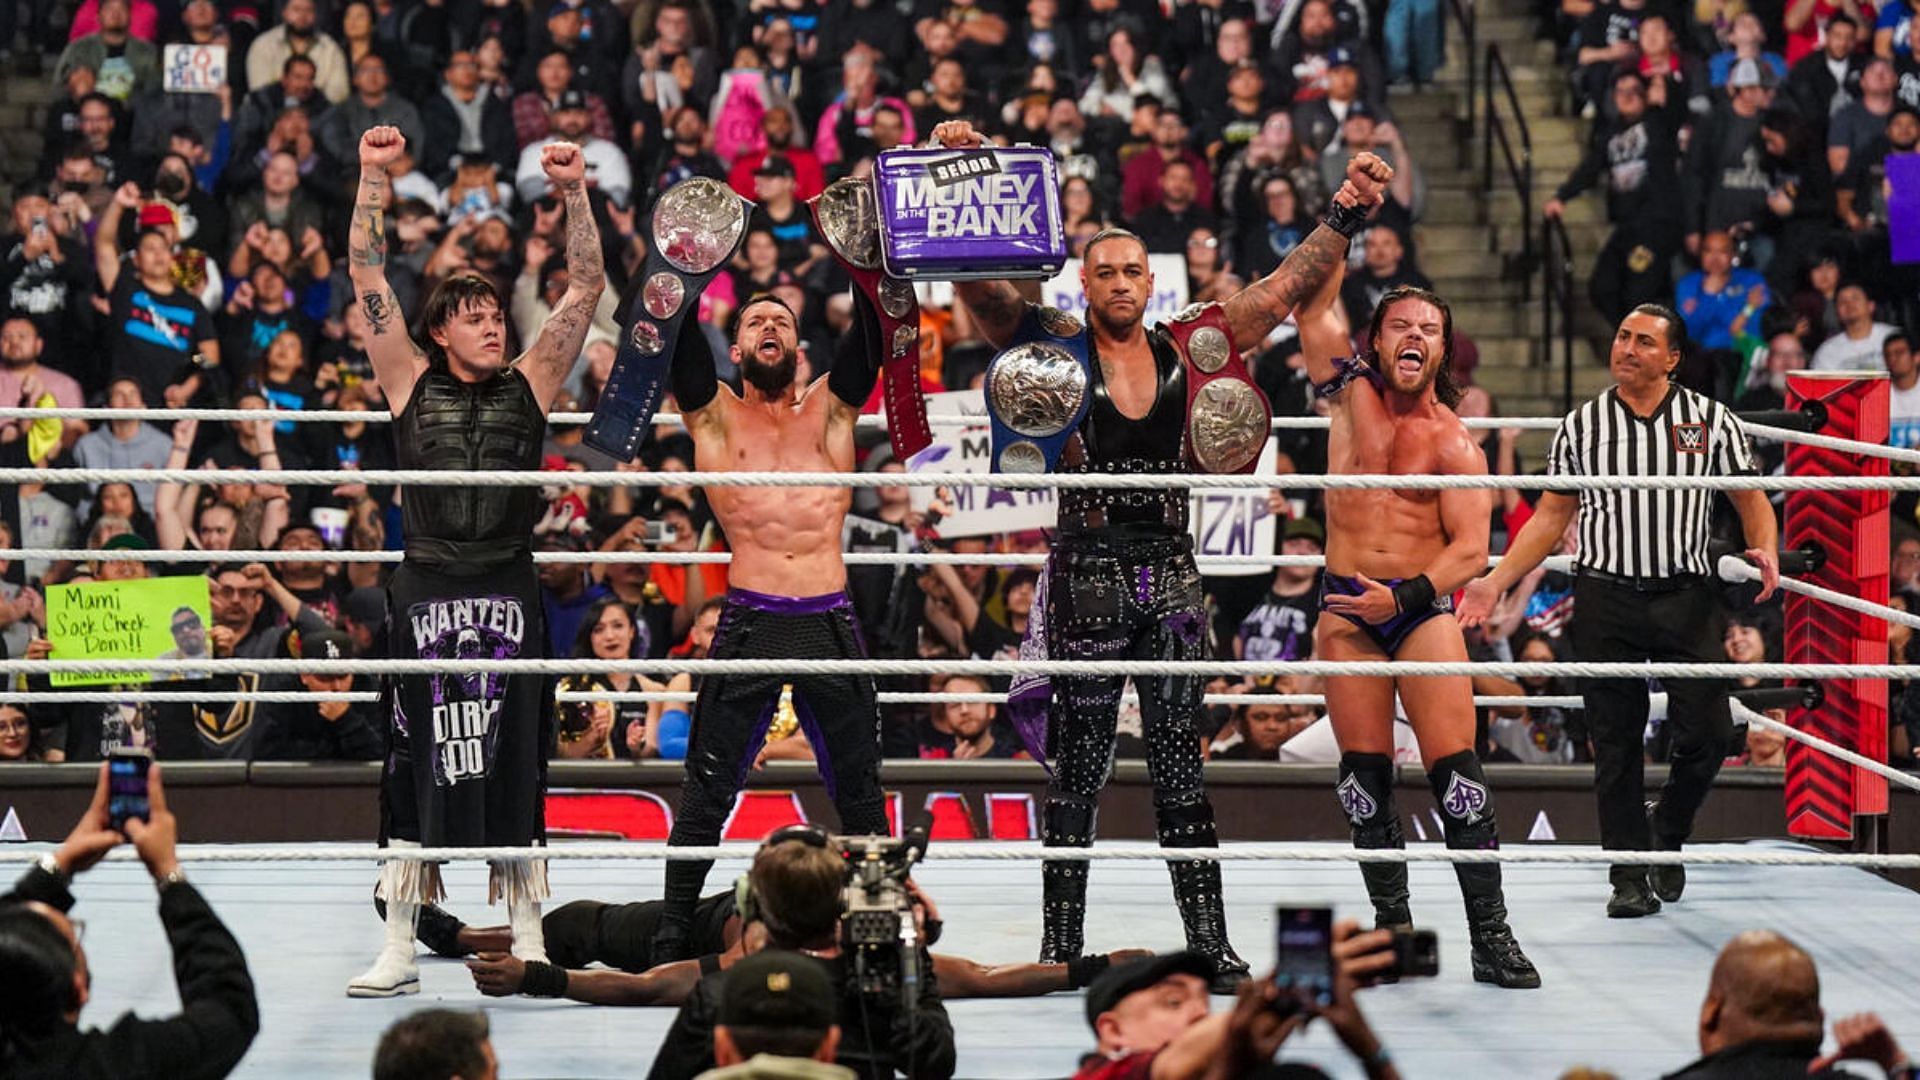 Judgment Day is a heel faction in WWE.